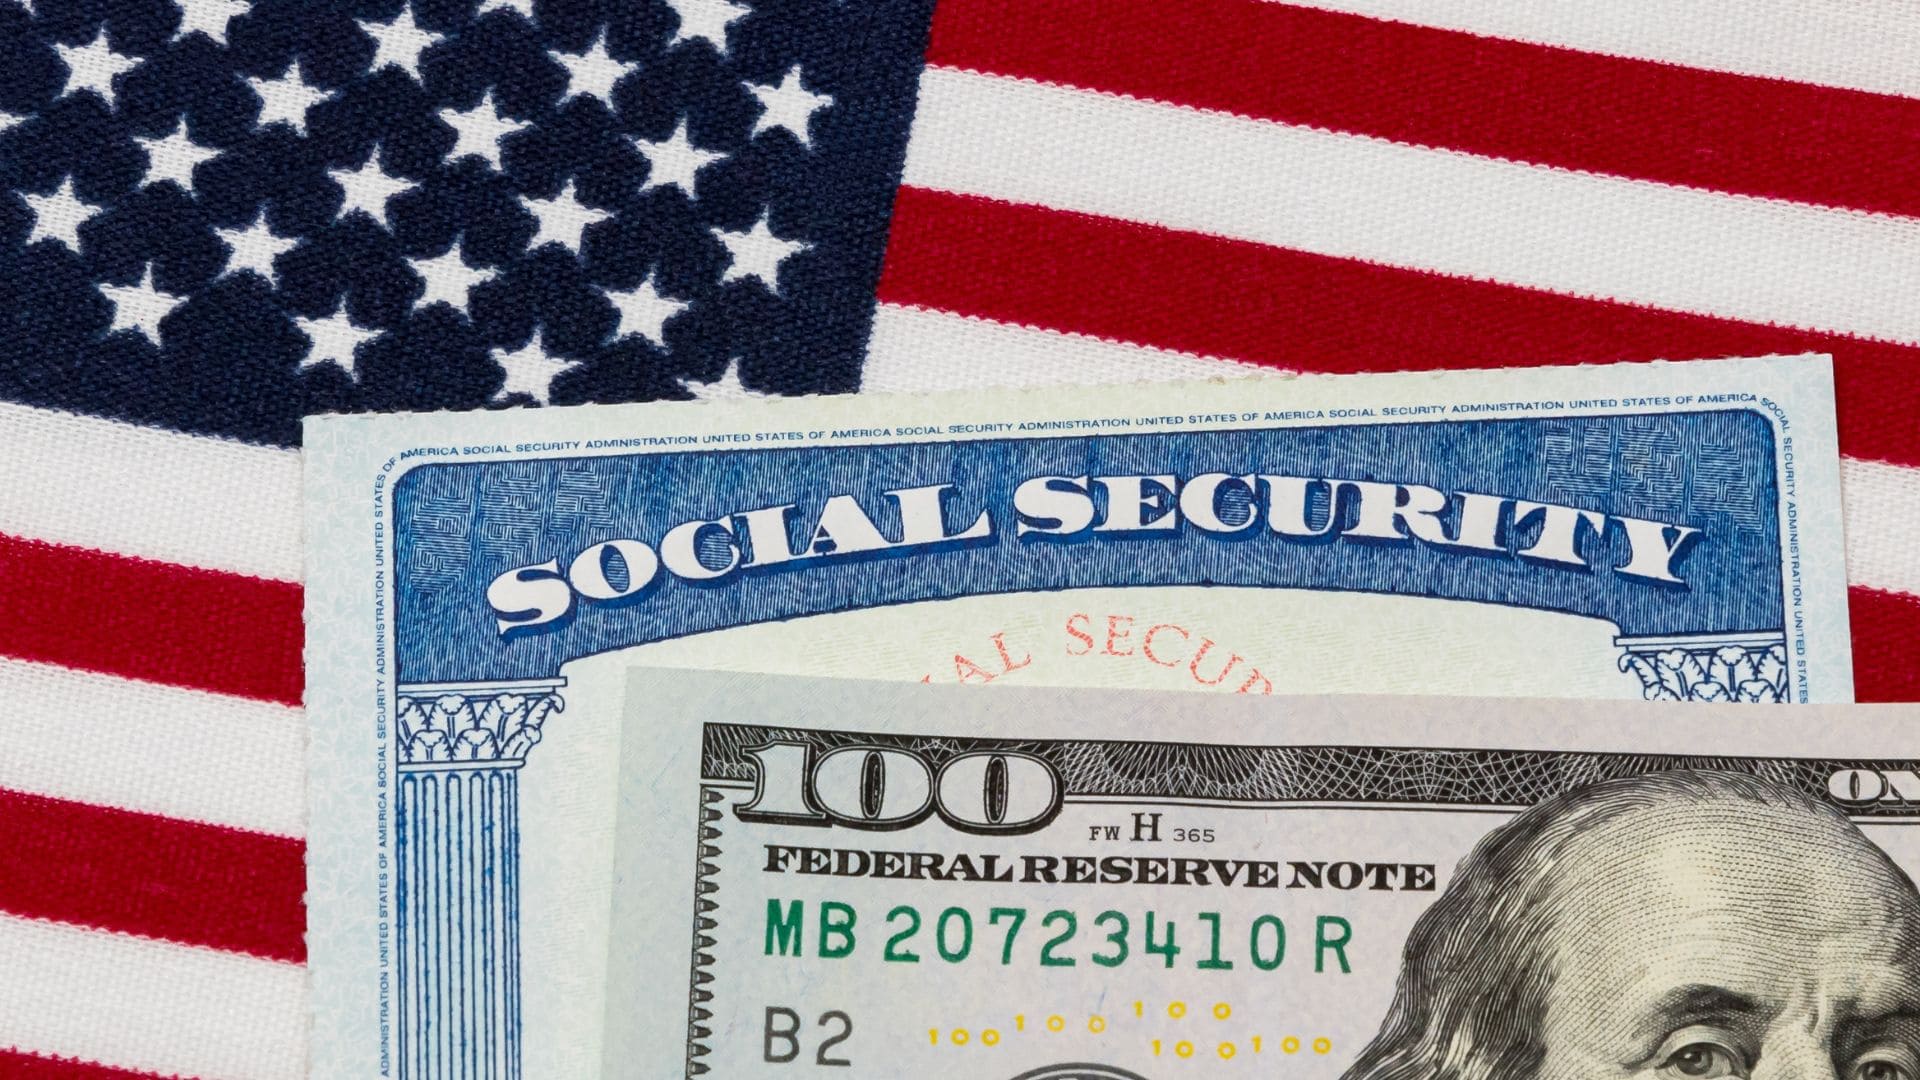 Find out if you meet the requirements to get more than 1 Social Security check in December